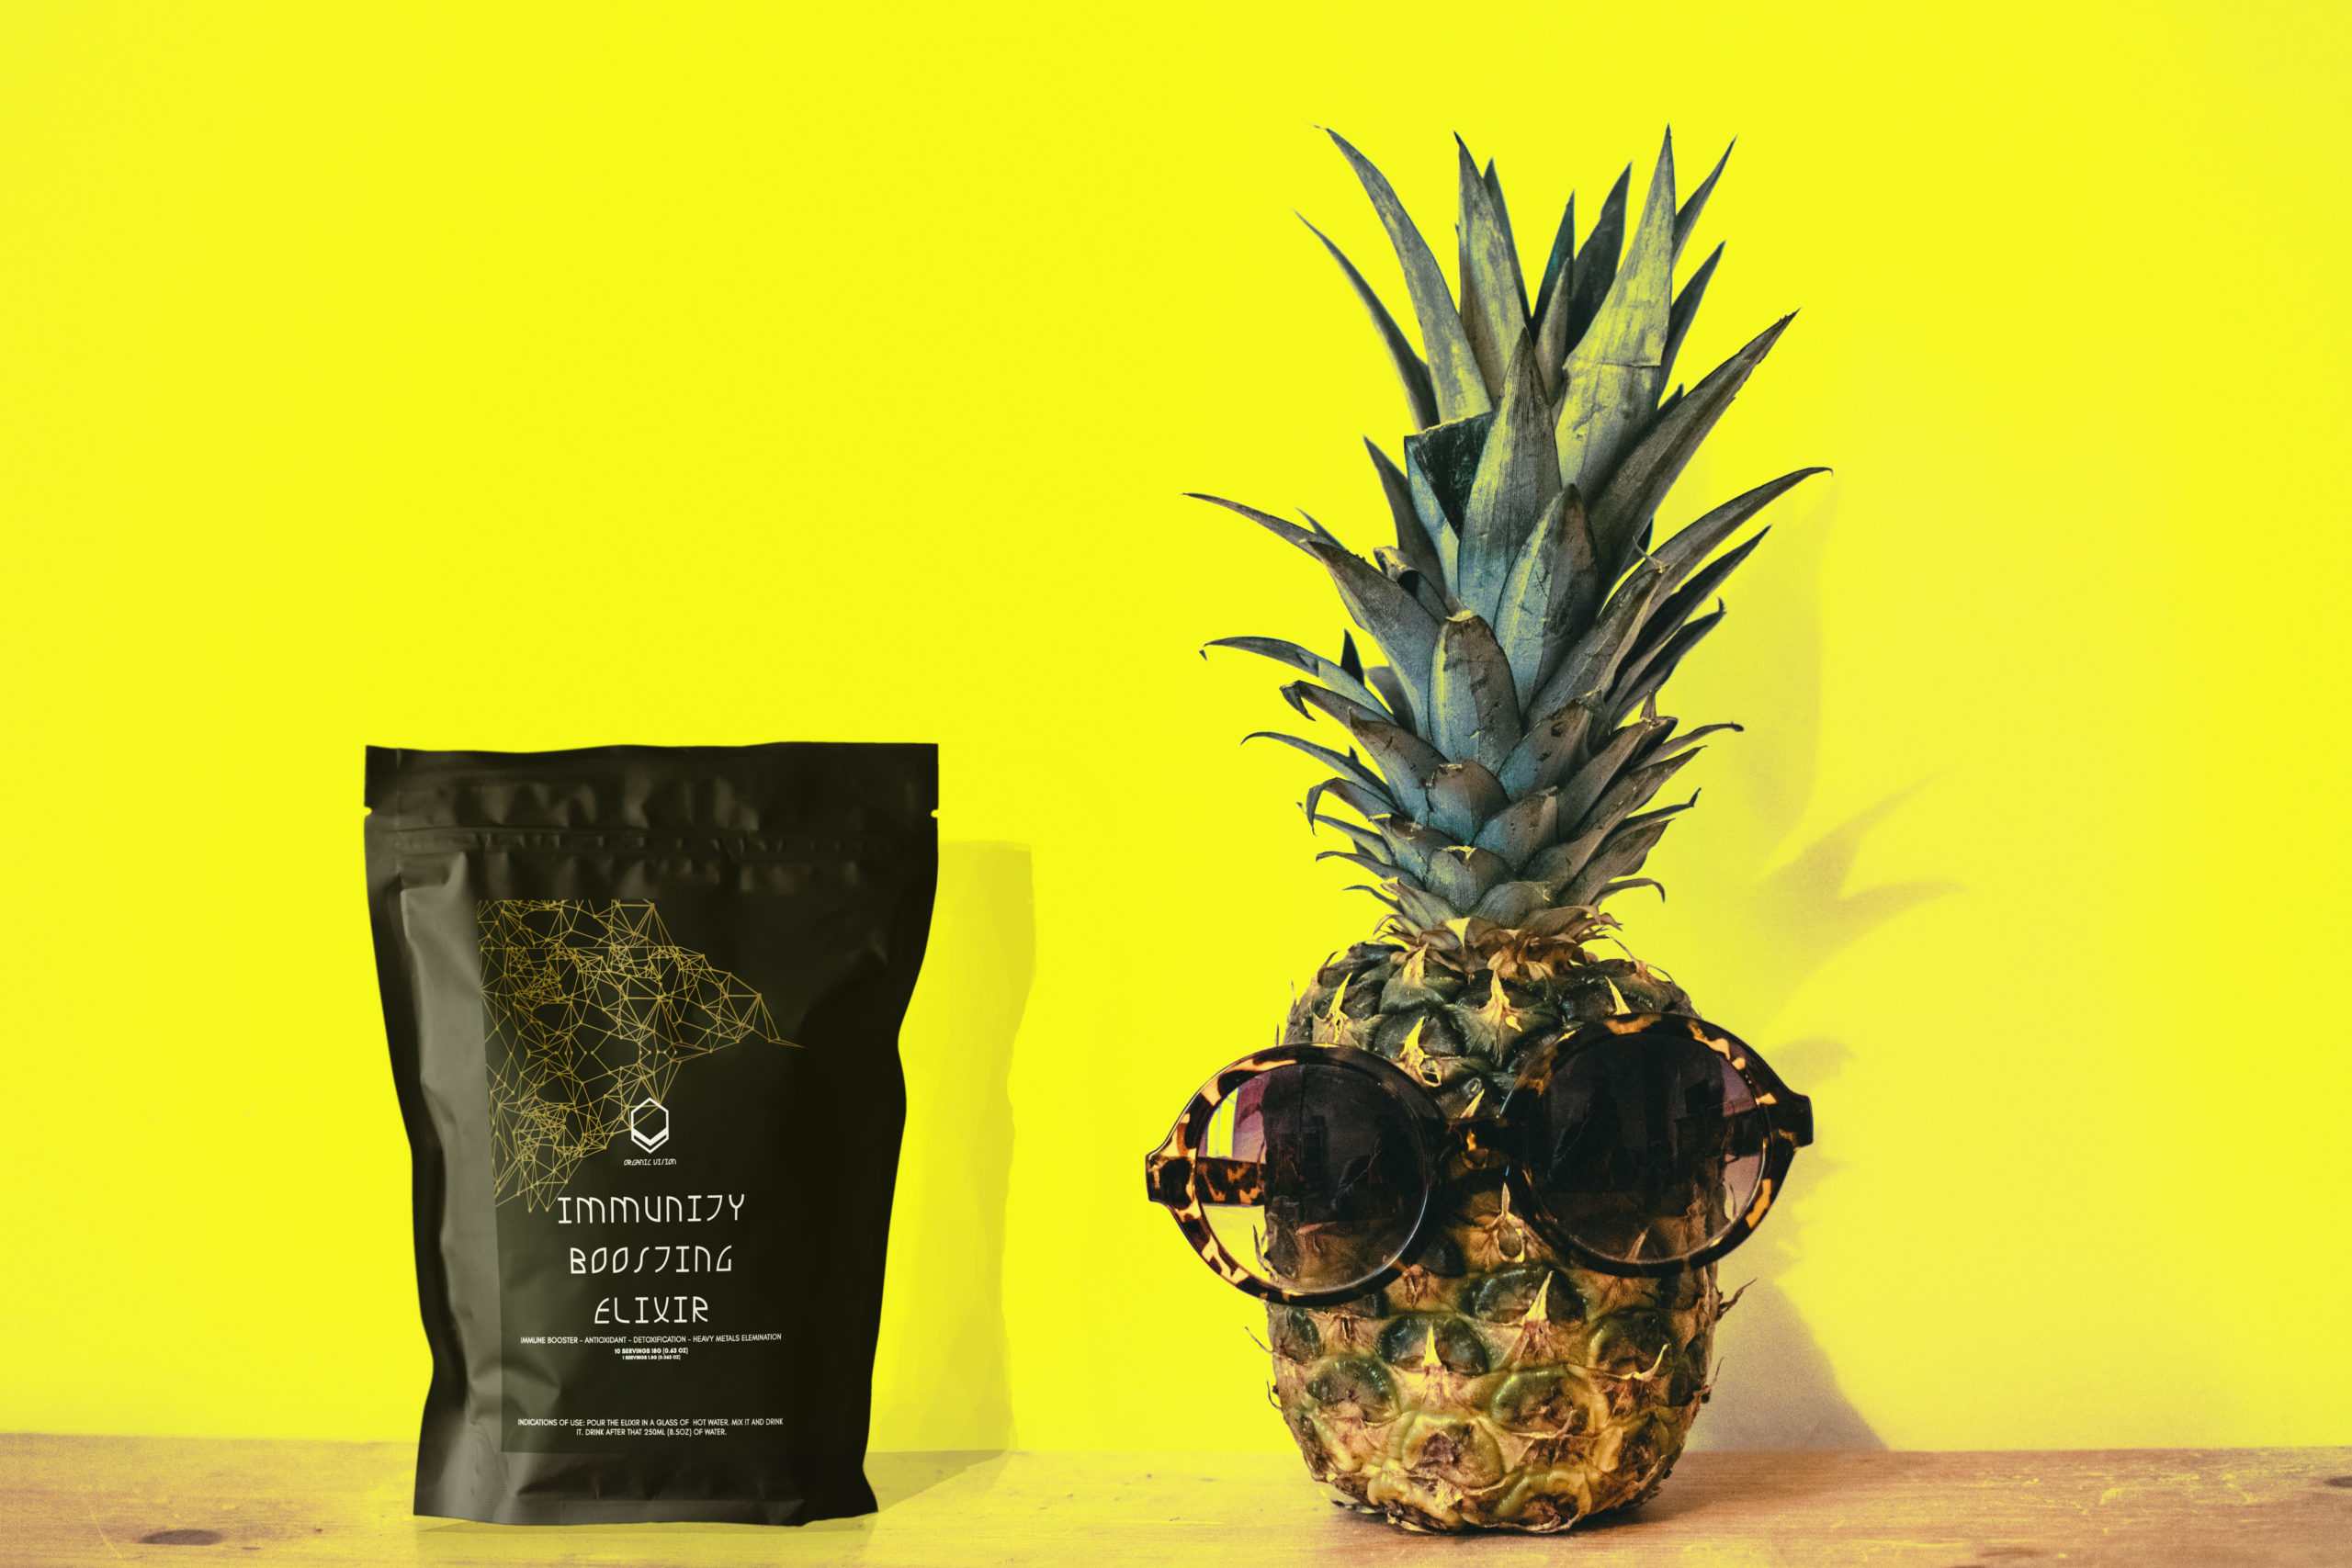 Immunity boosting elixir and pineapple near a yellow background